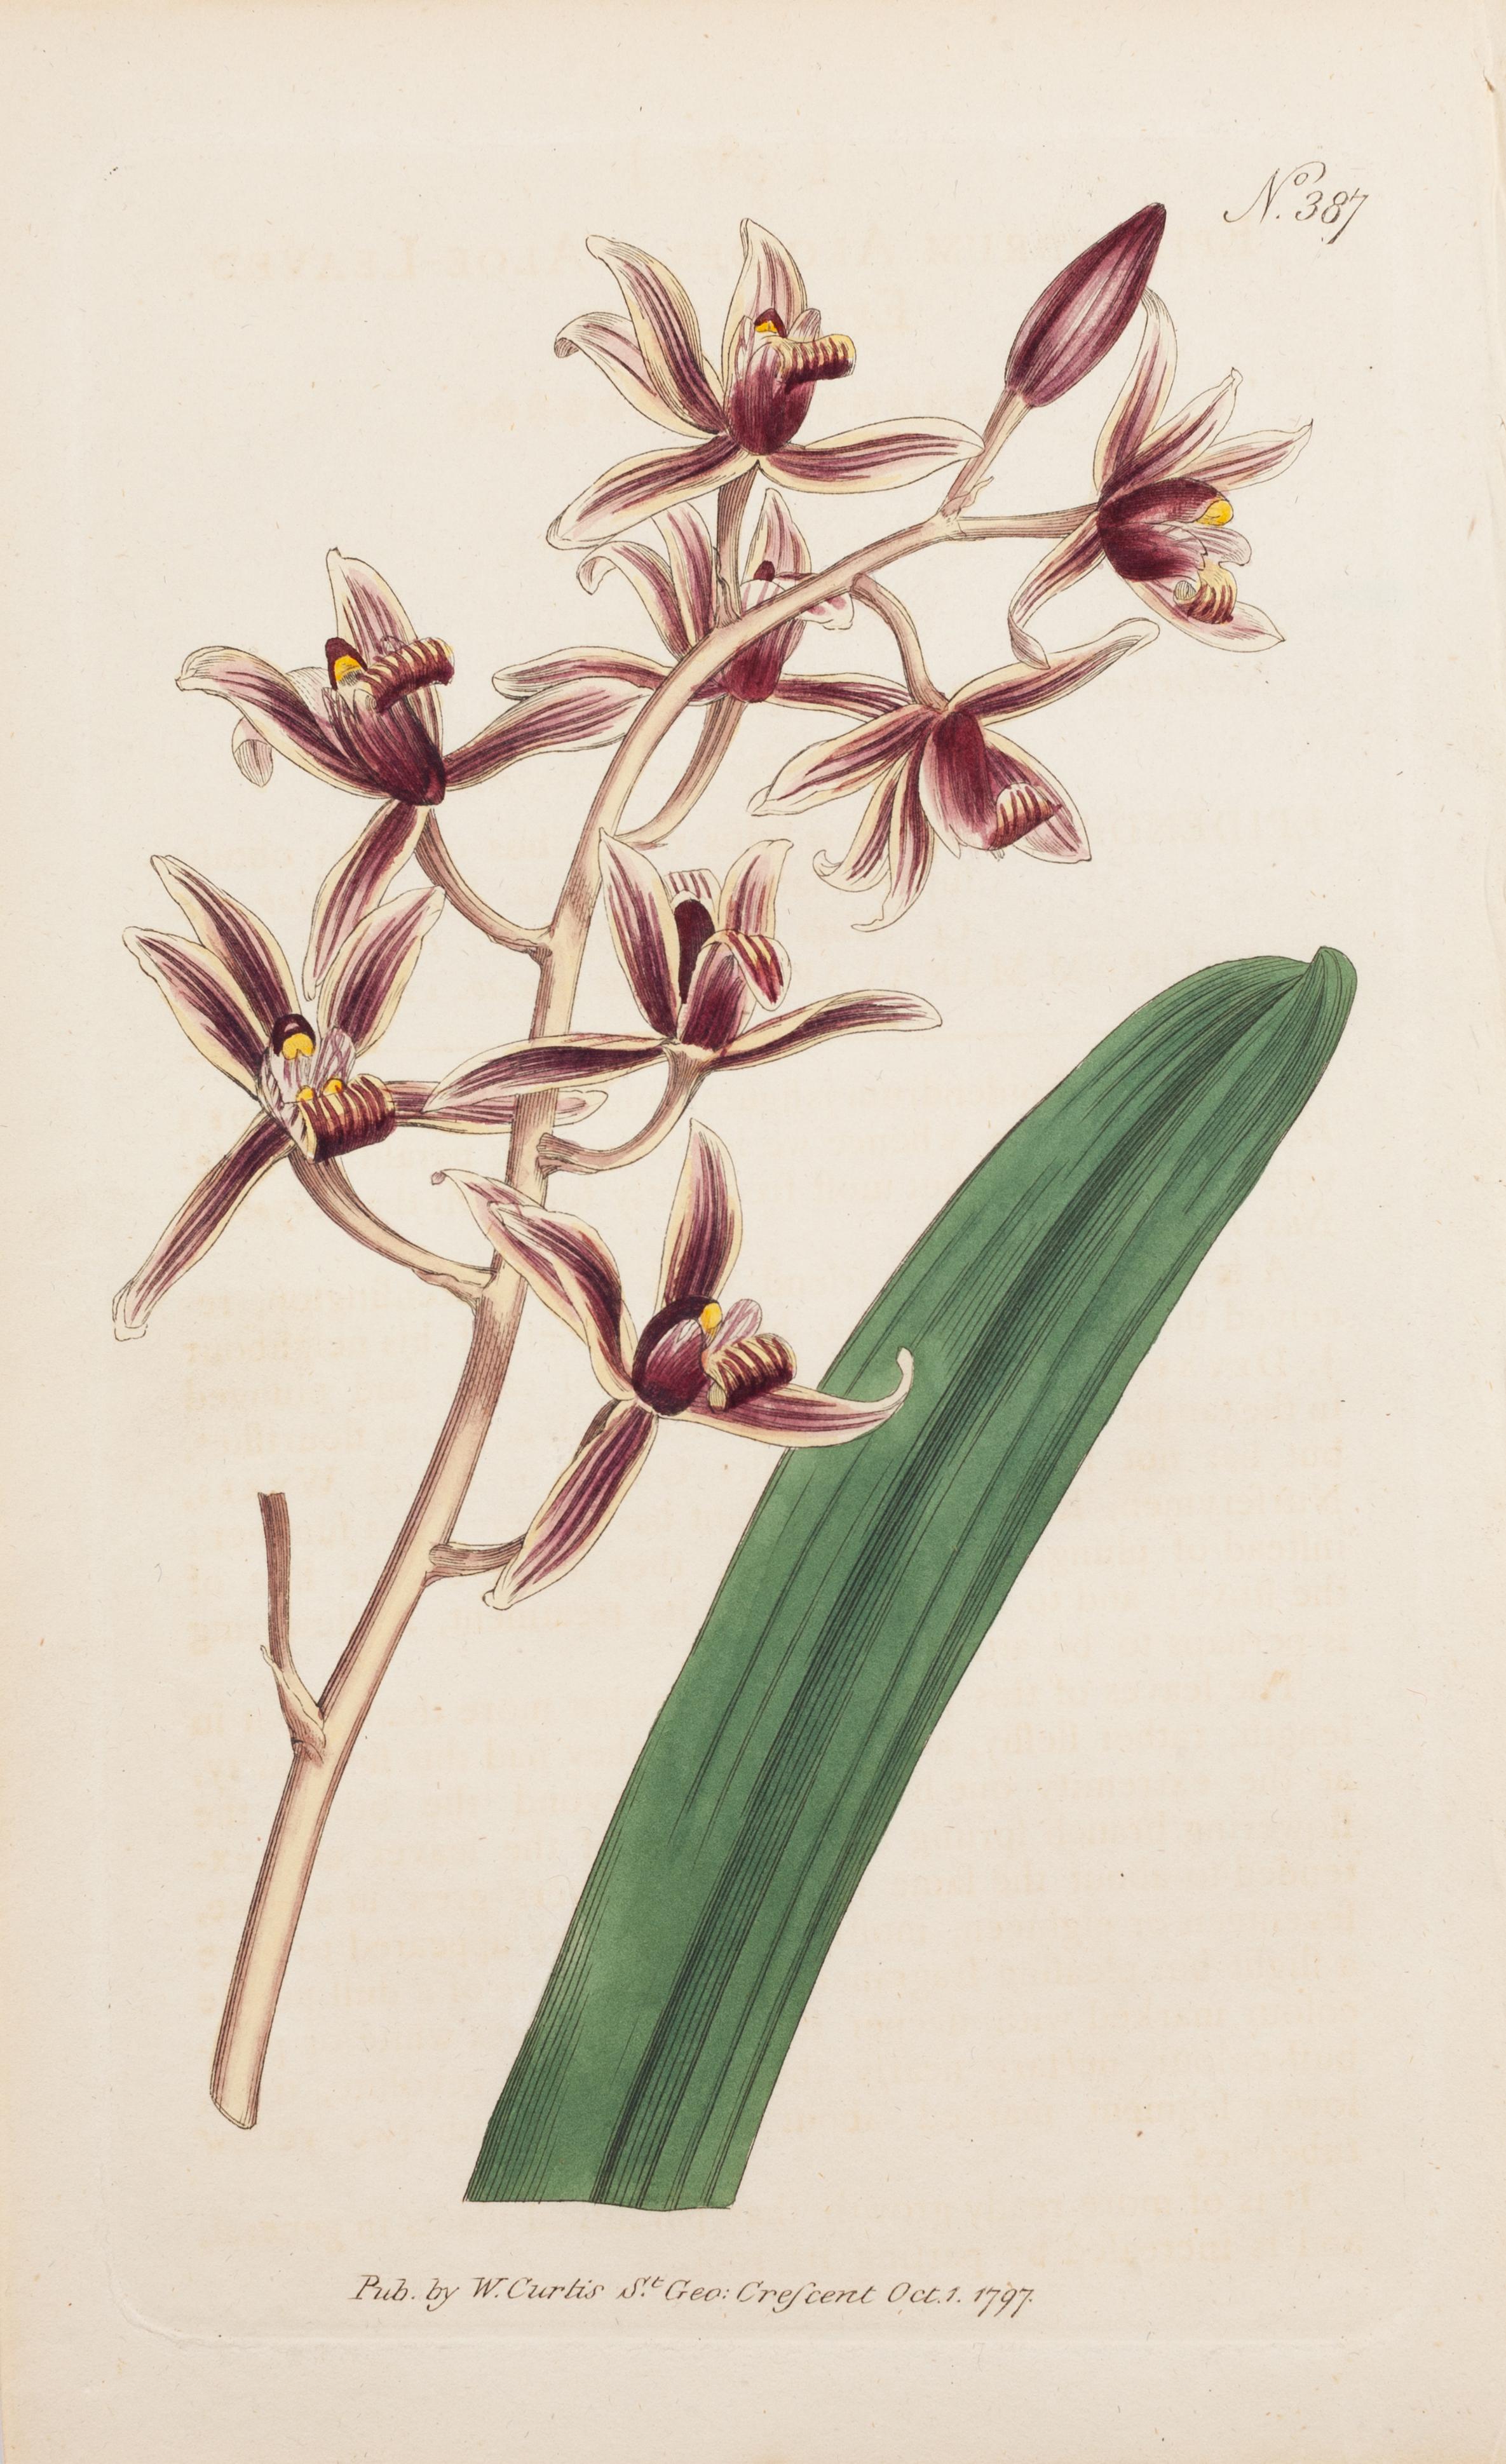 Epidendrum Aloe-leaved, Epdendrum aloides Plate 387